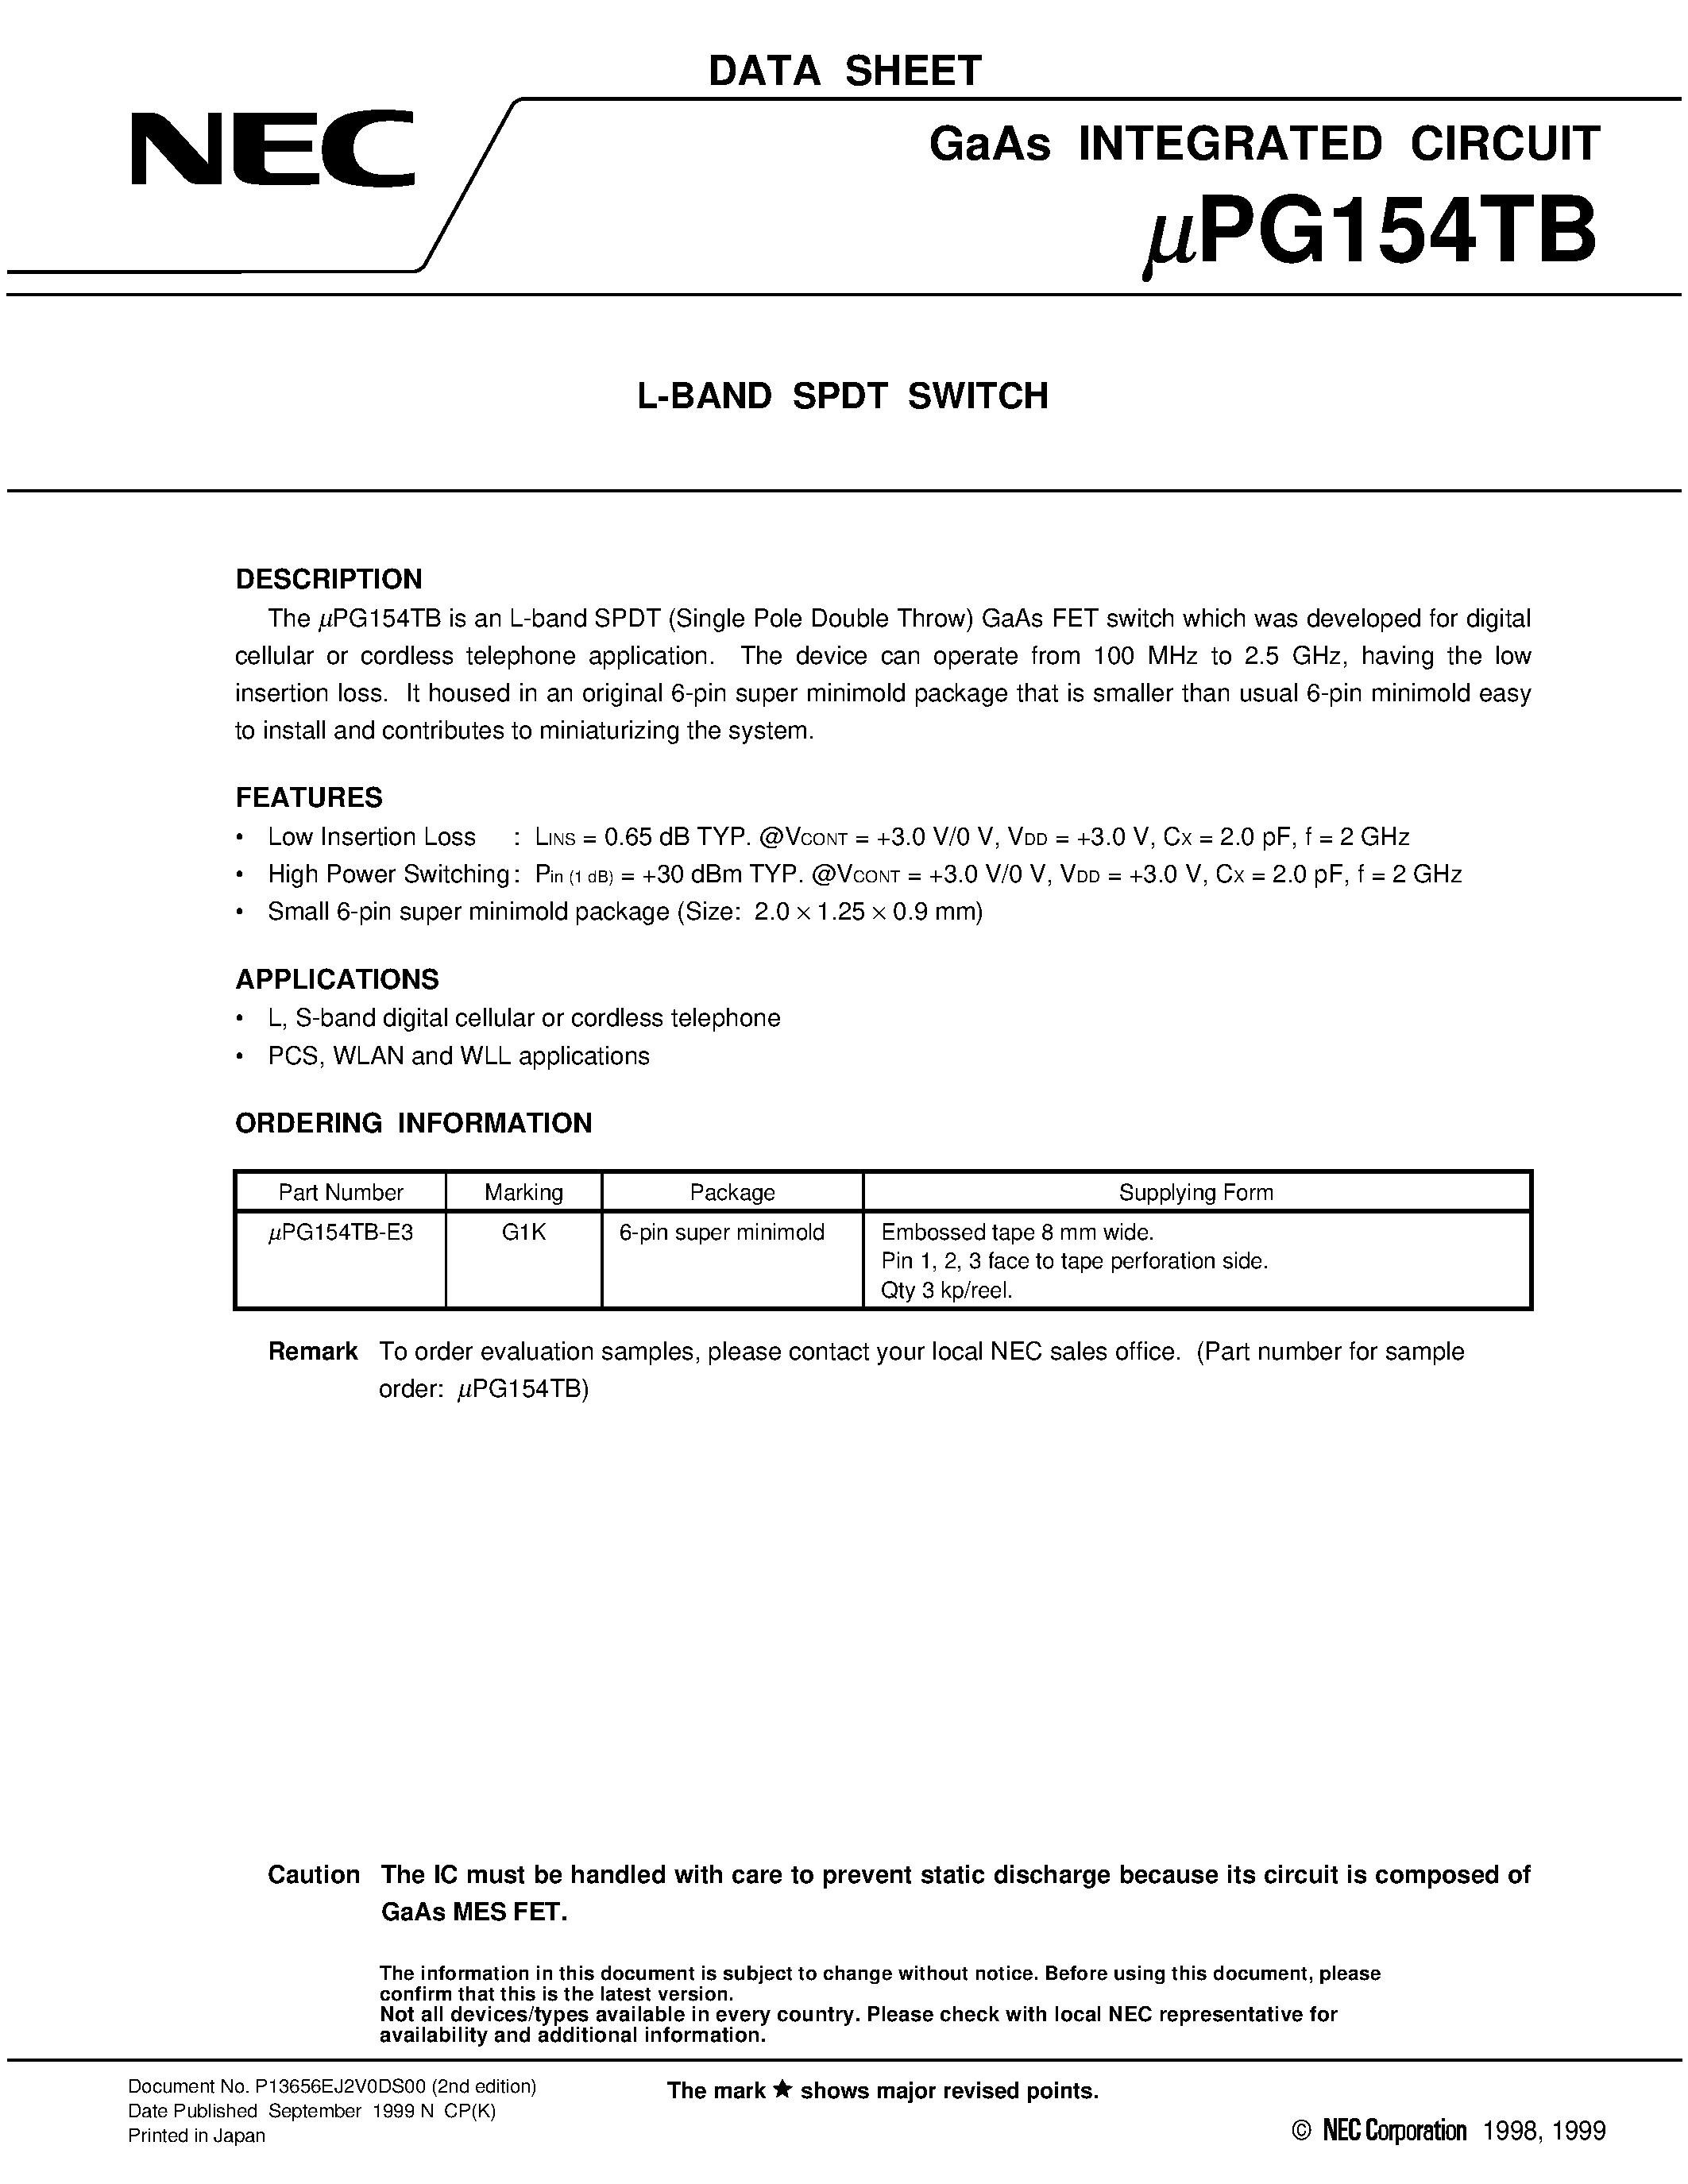 Datasheet UPG154TB - L-BAND SPDT SWITCH page 1